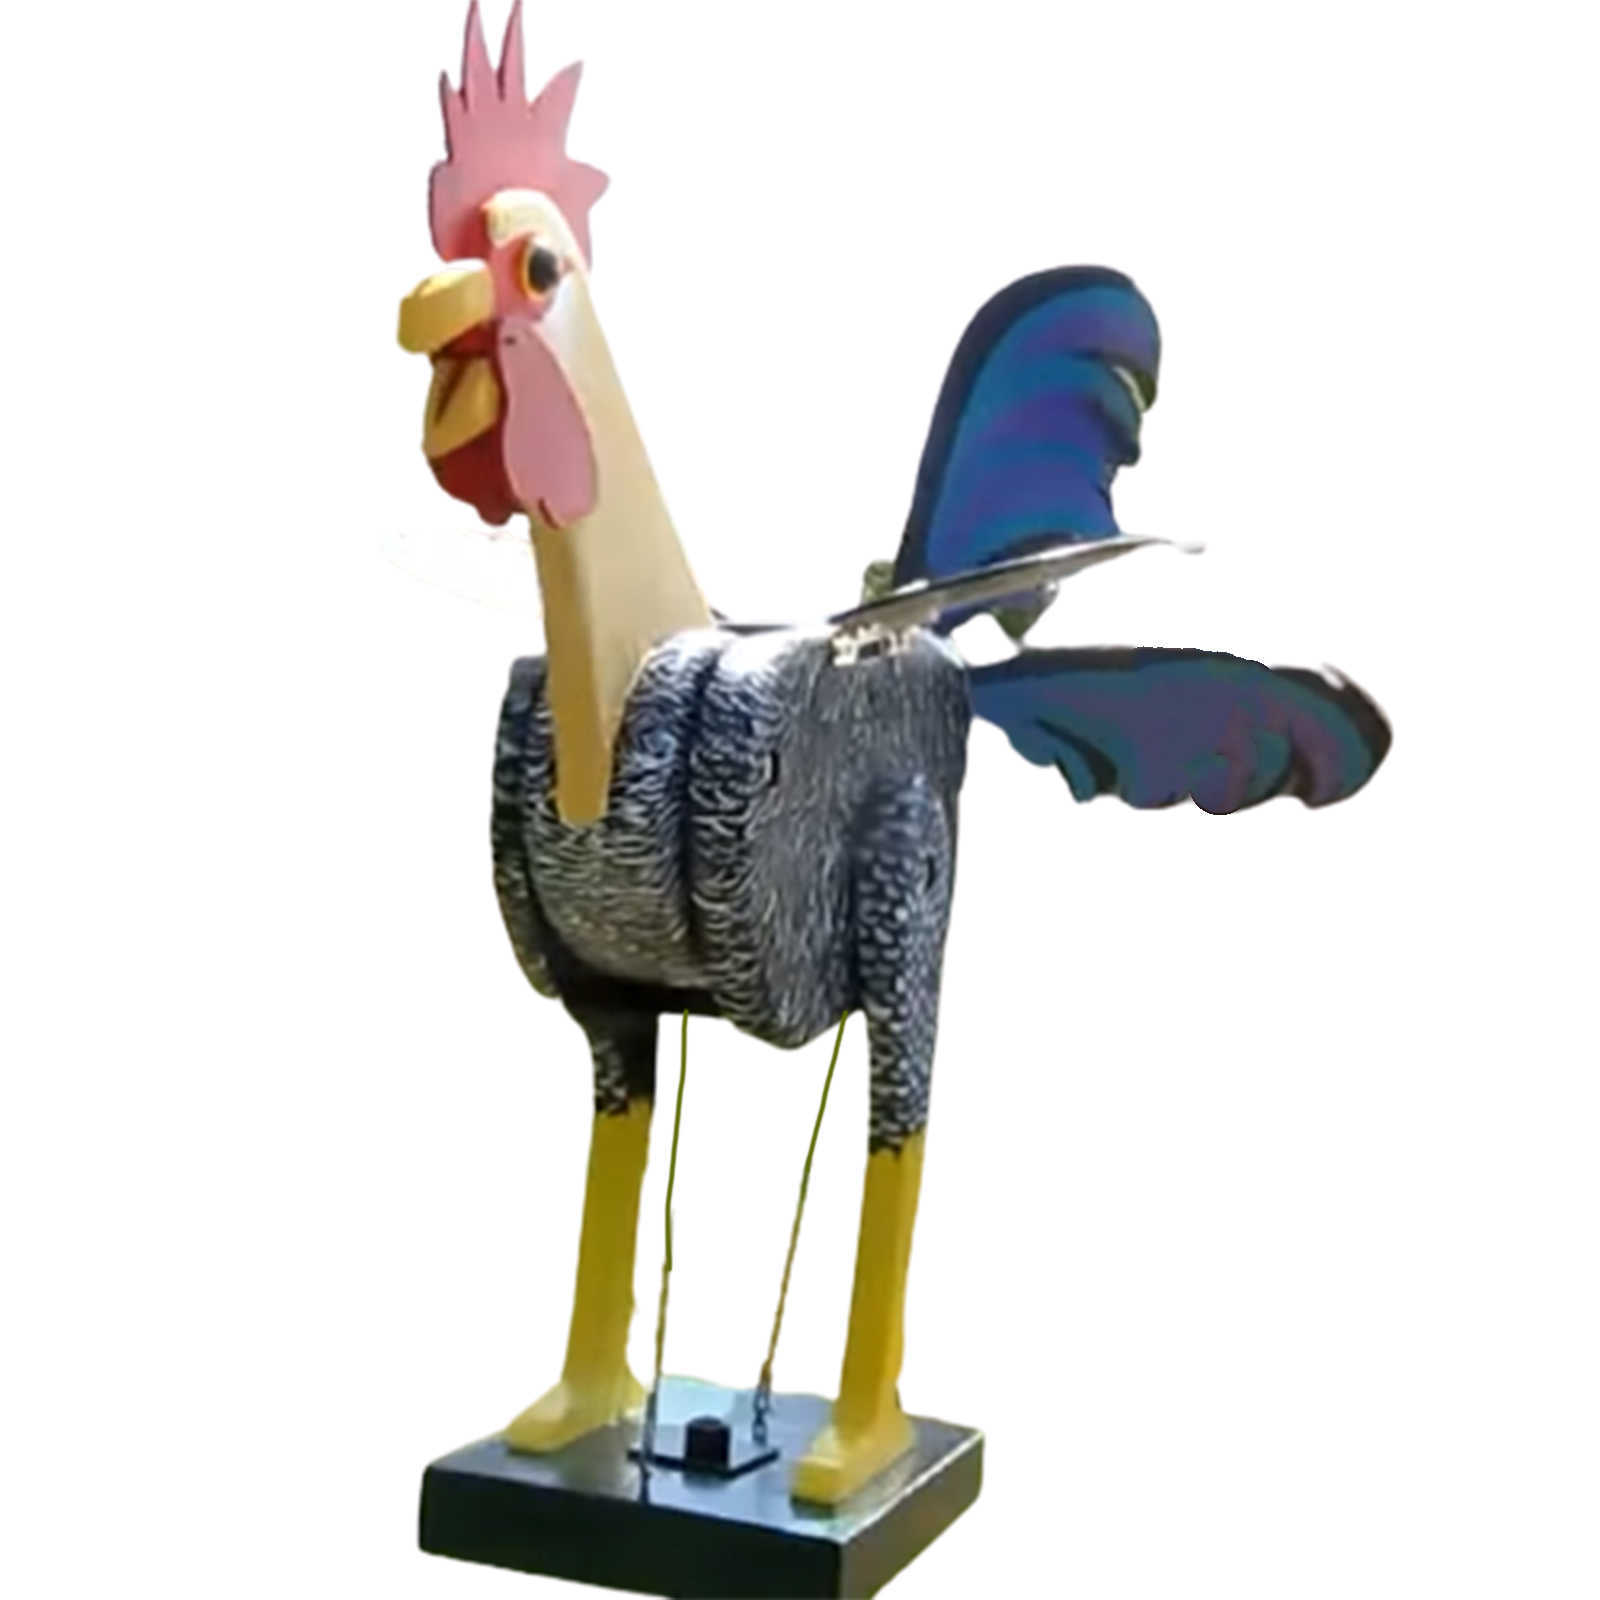 

Rooster Windmill Garden Courtyard Farm Decor Yard Statue Vivid Sculpture Outdoor Decoration Father's Day Gift 23x19cm LBShipping Q0811